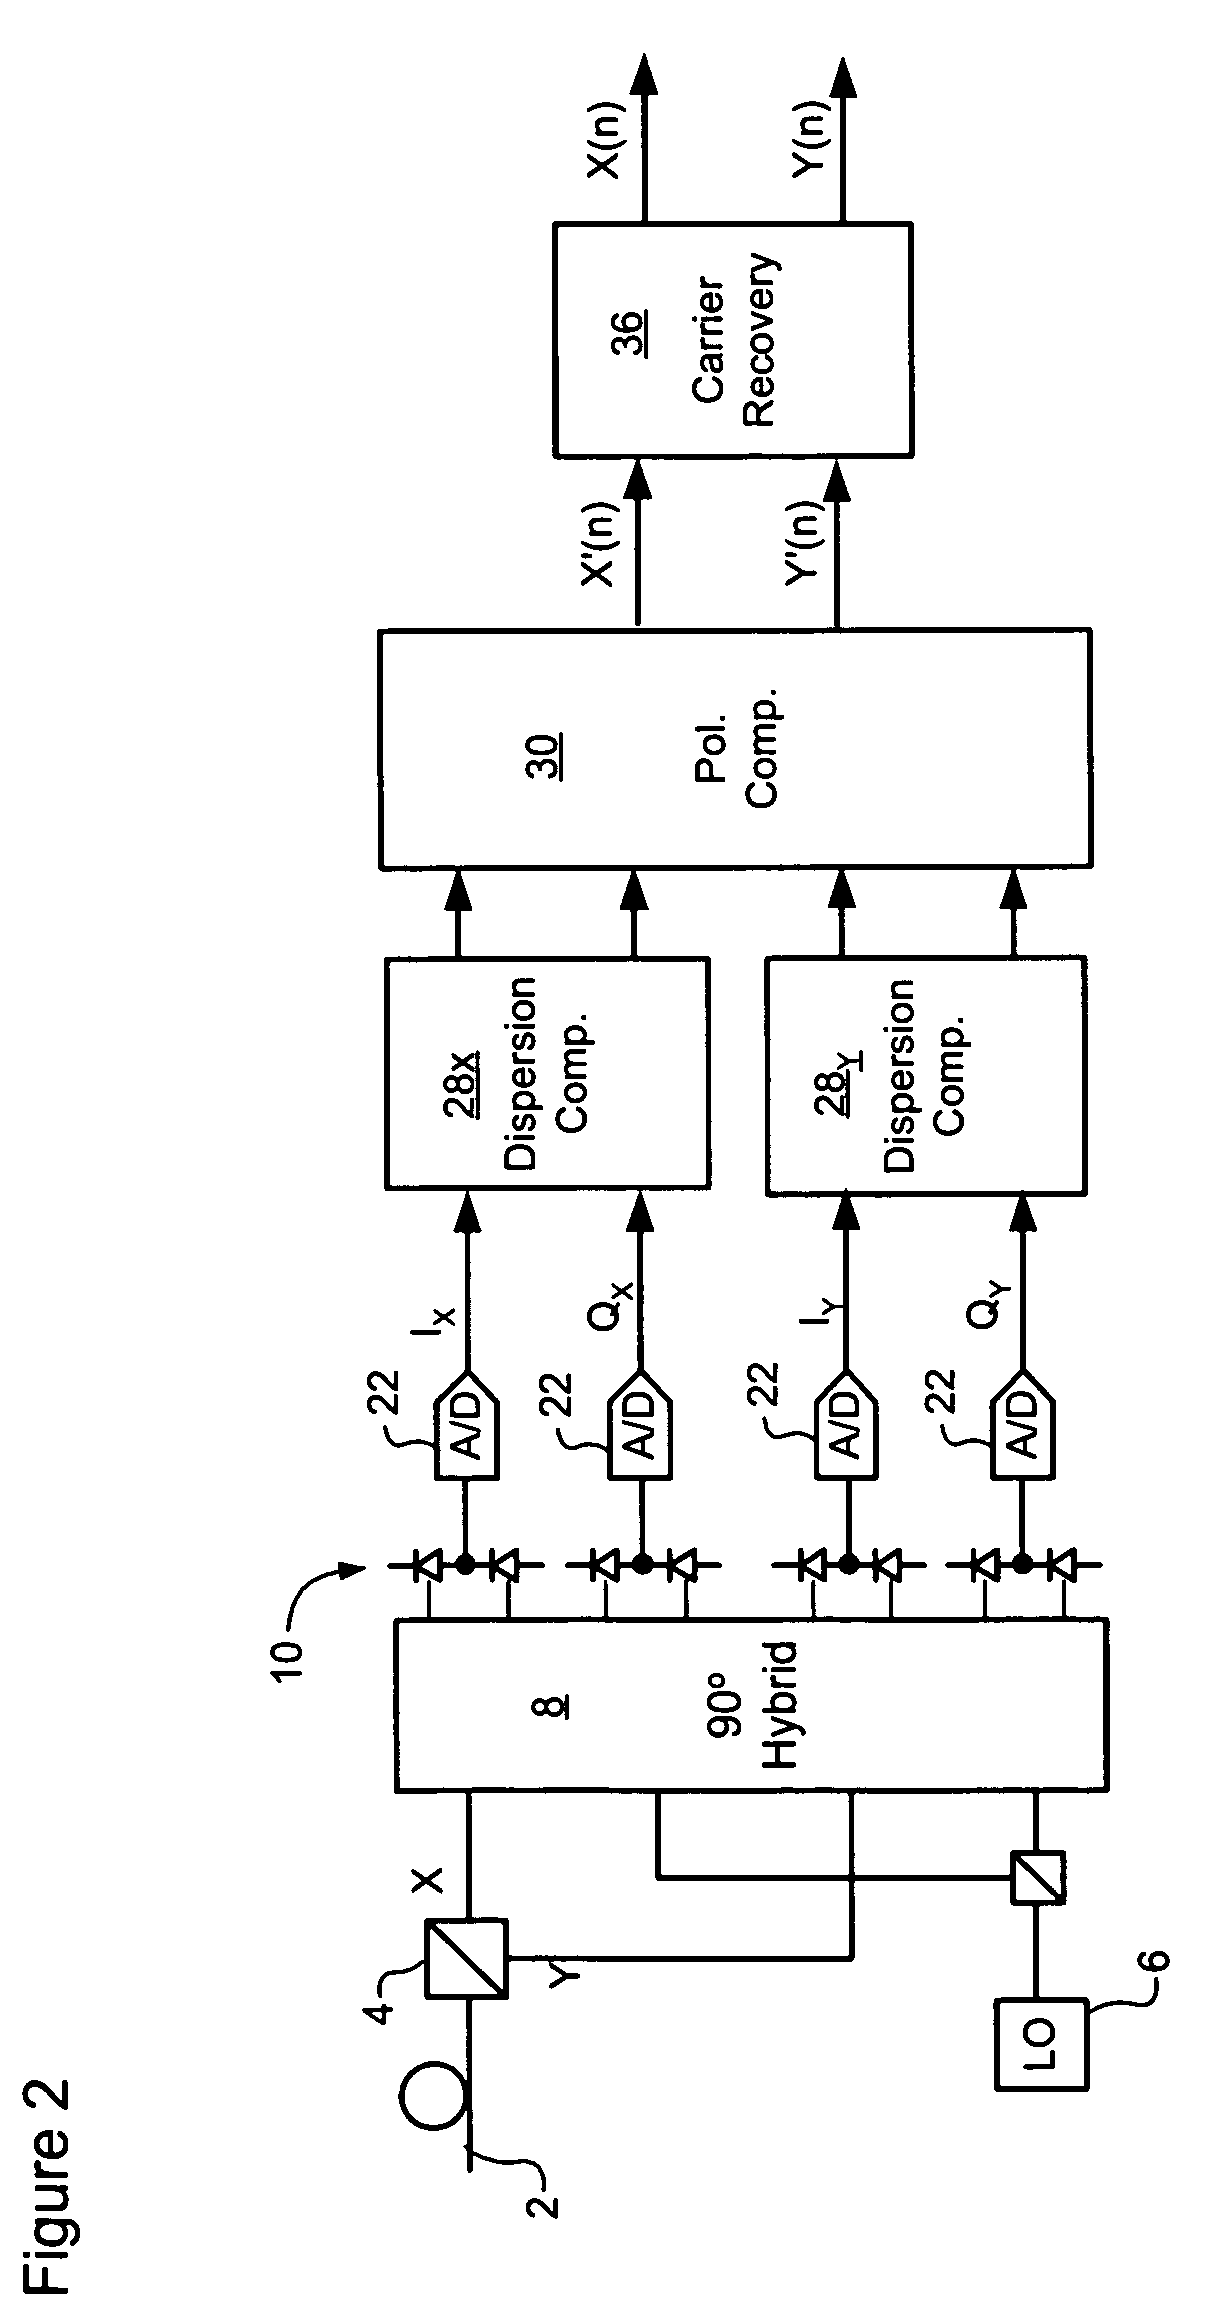 Carrier recovery in a coherent optical receiver